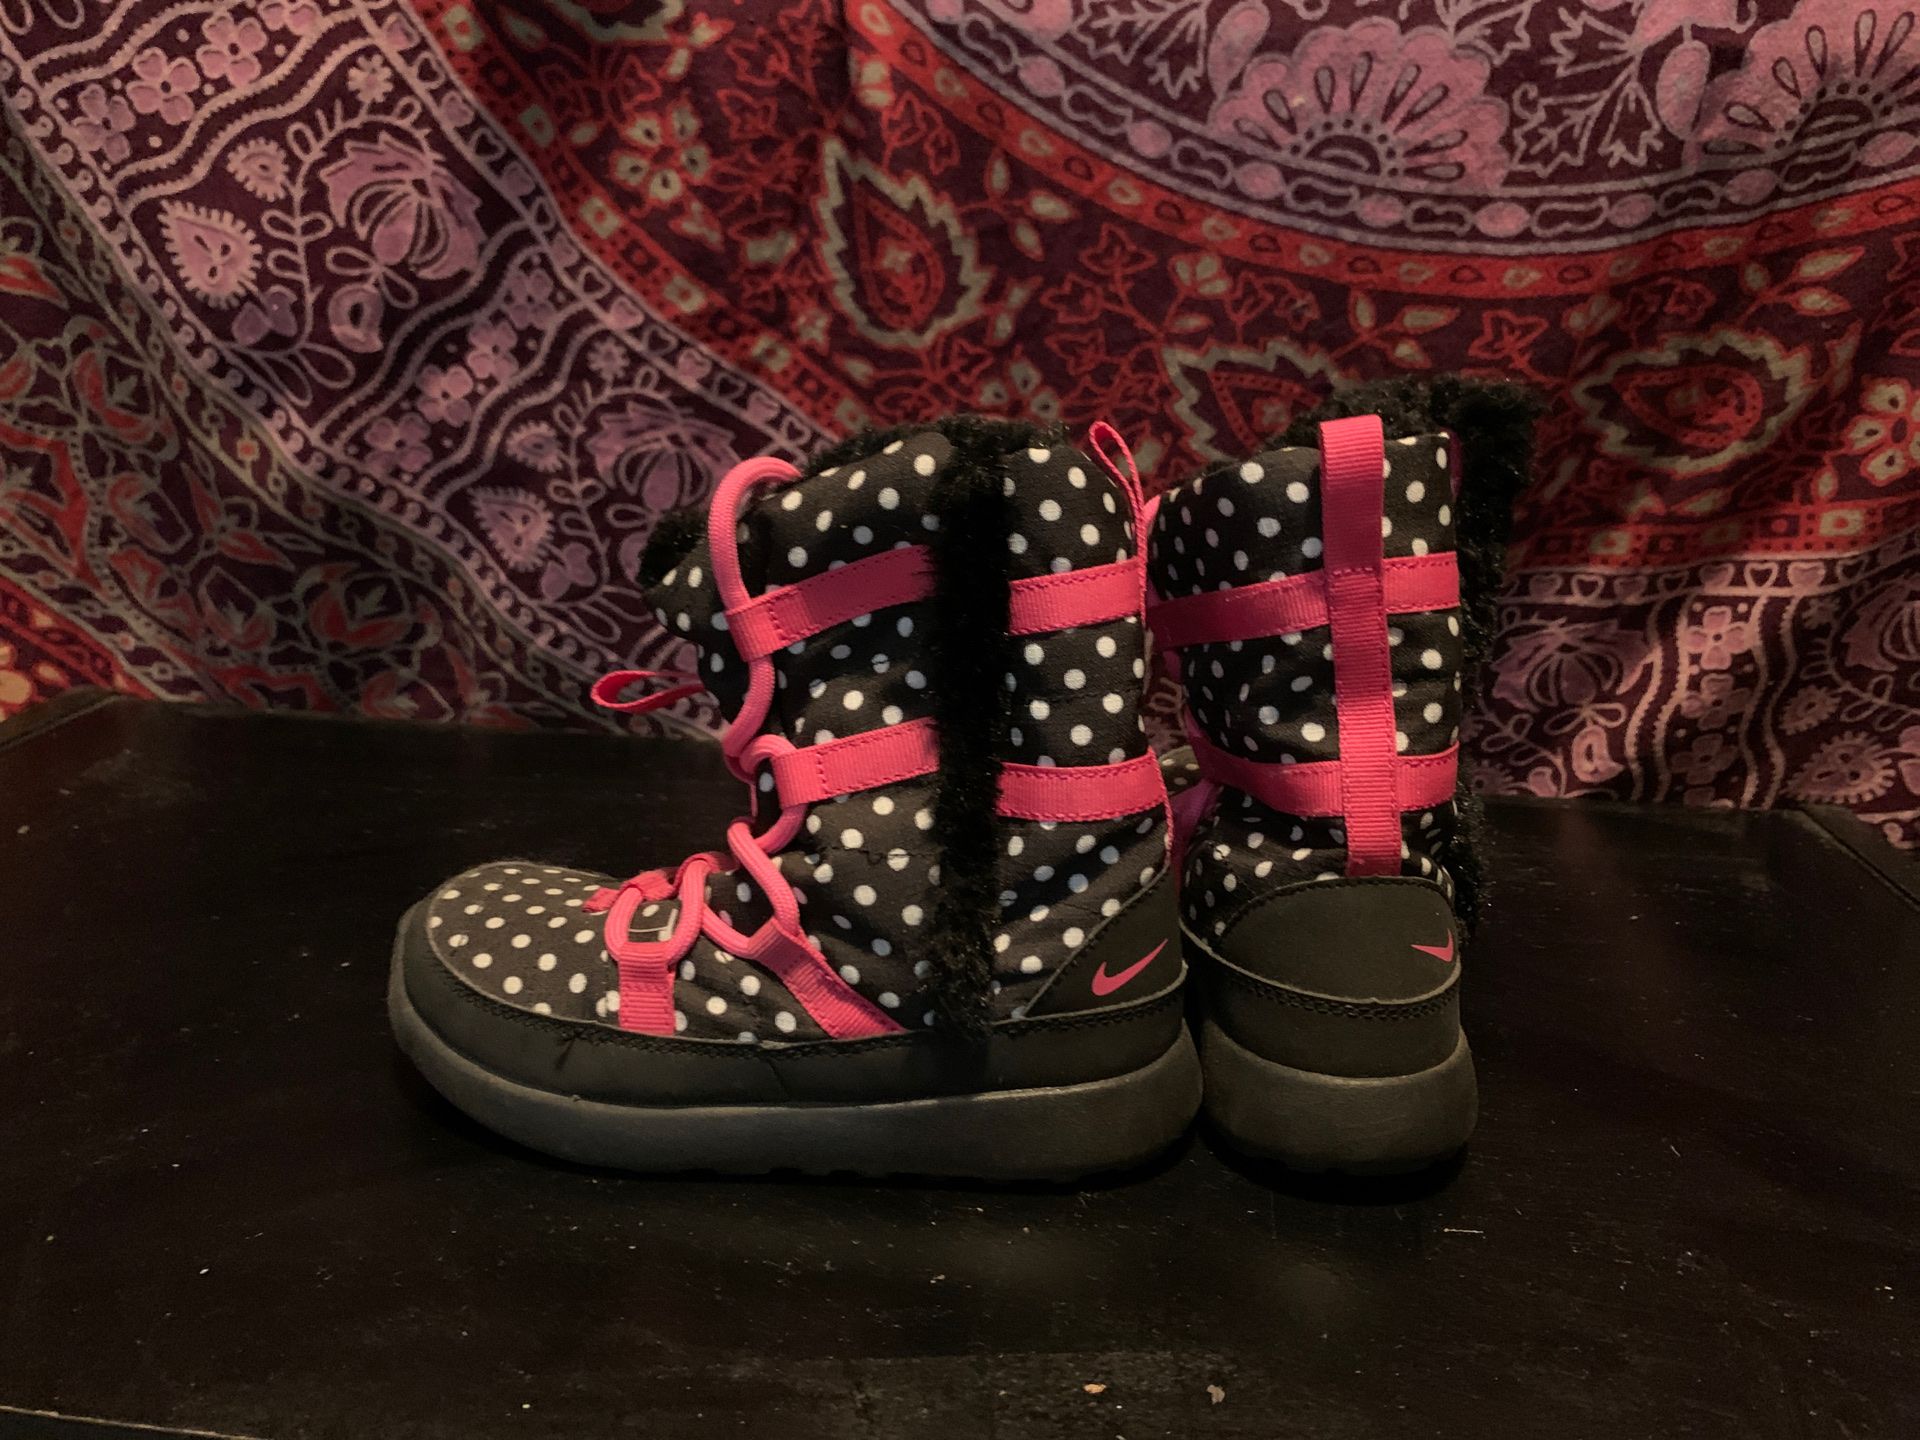 Nike girls snow boots